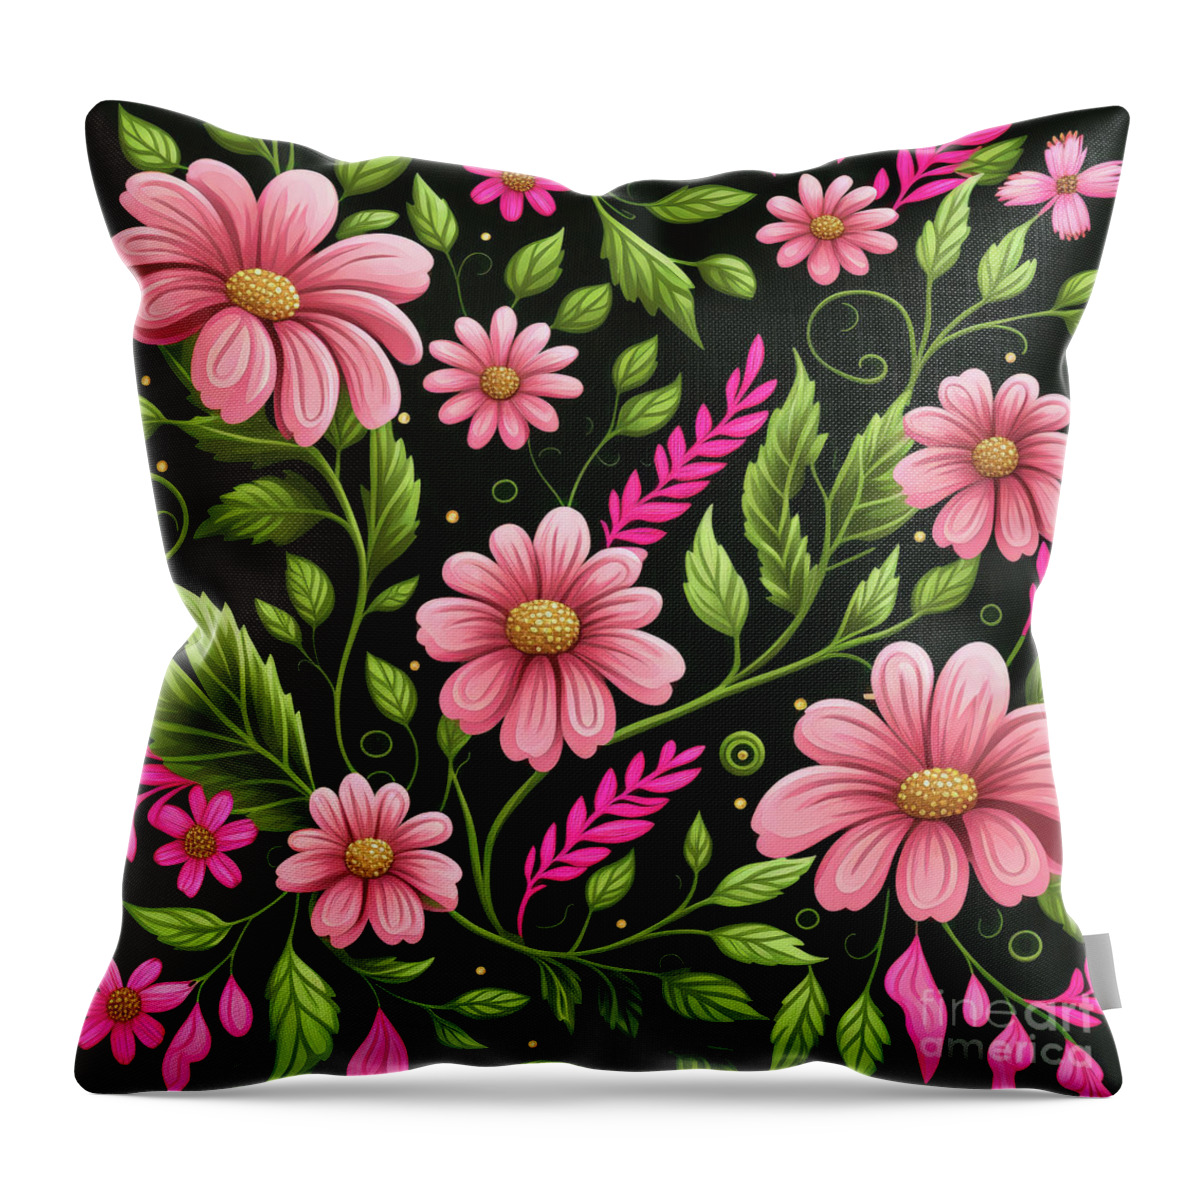 Pink Daisy Throw Pillow featuring the painting Pink Daisy Flowers by Tina LeCour